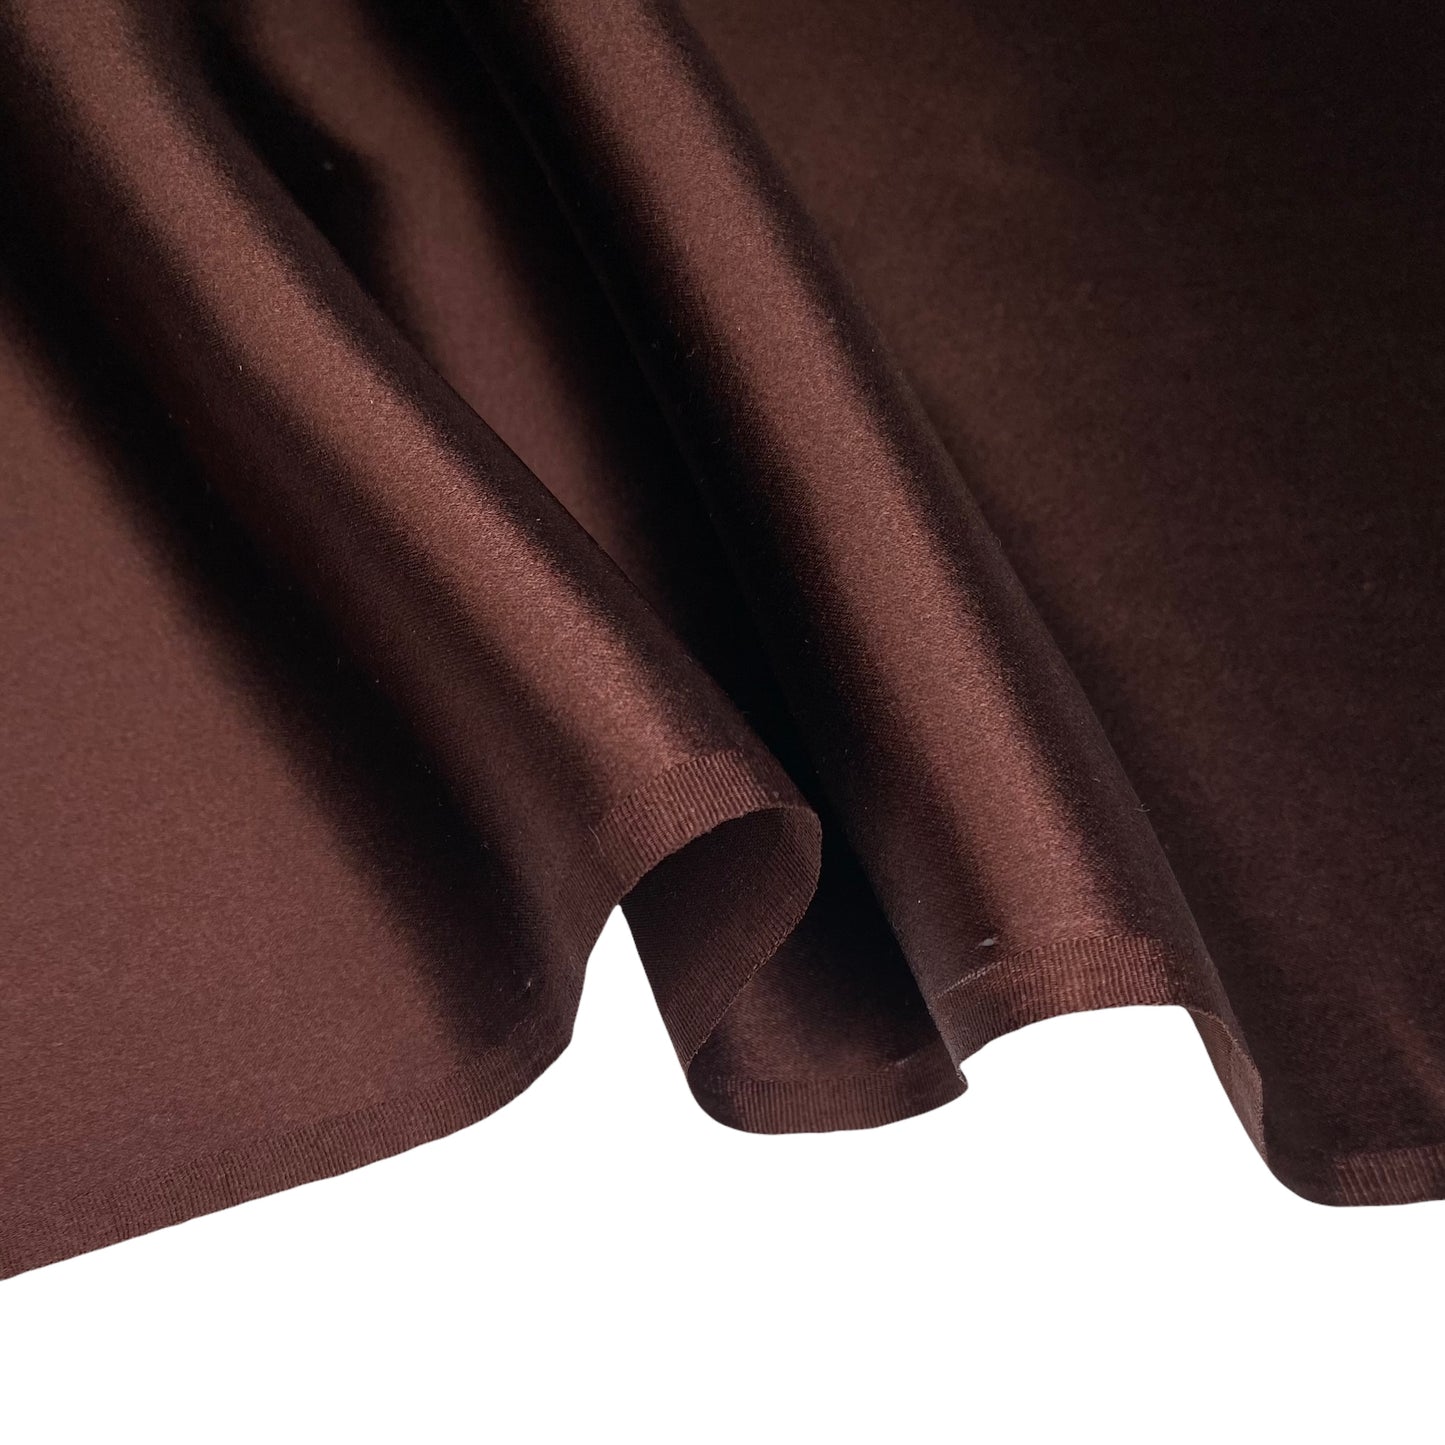 Mulberry Silk Charmeuse - 54” - Brown